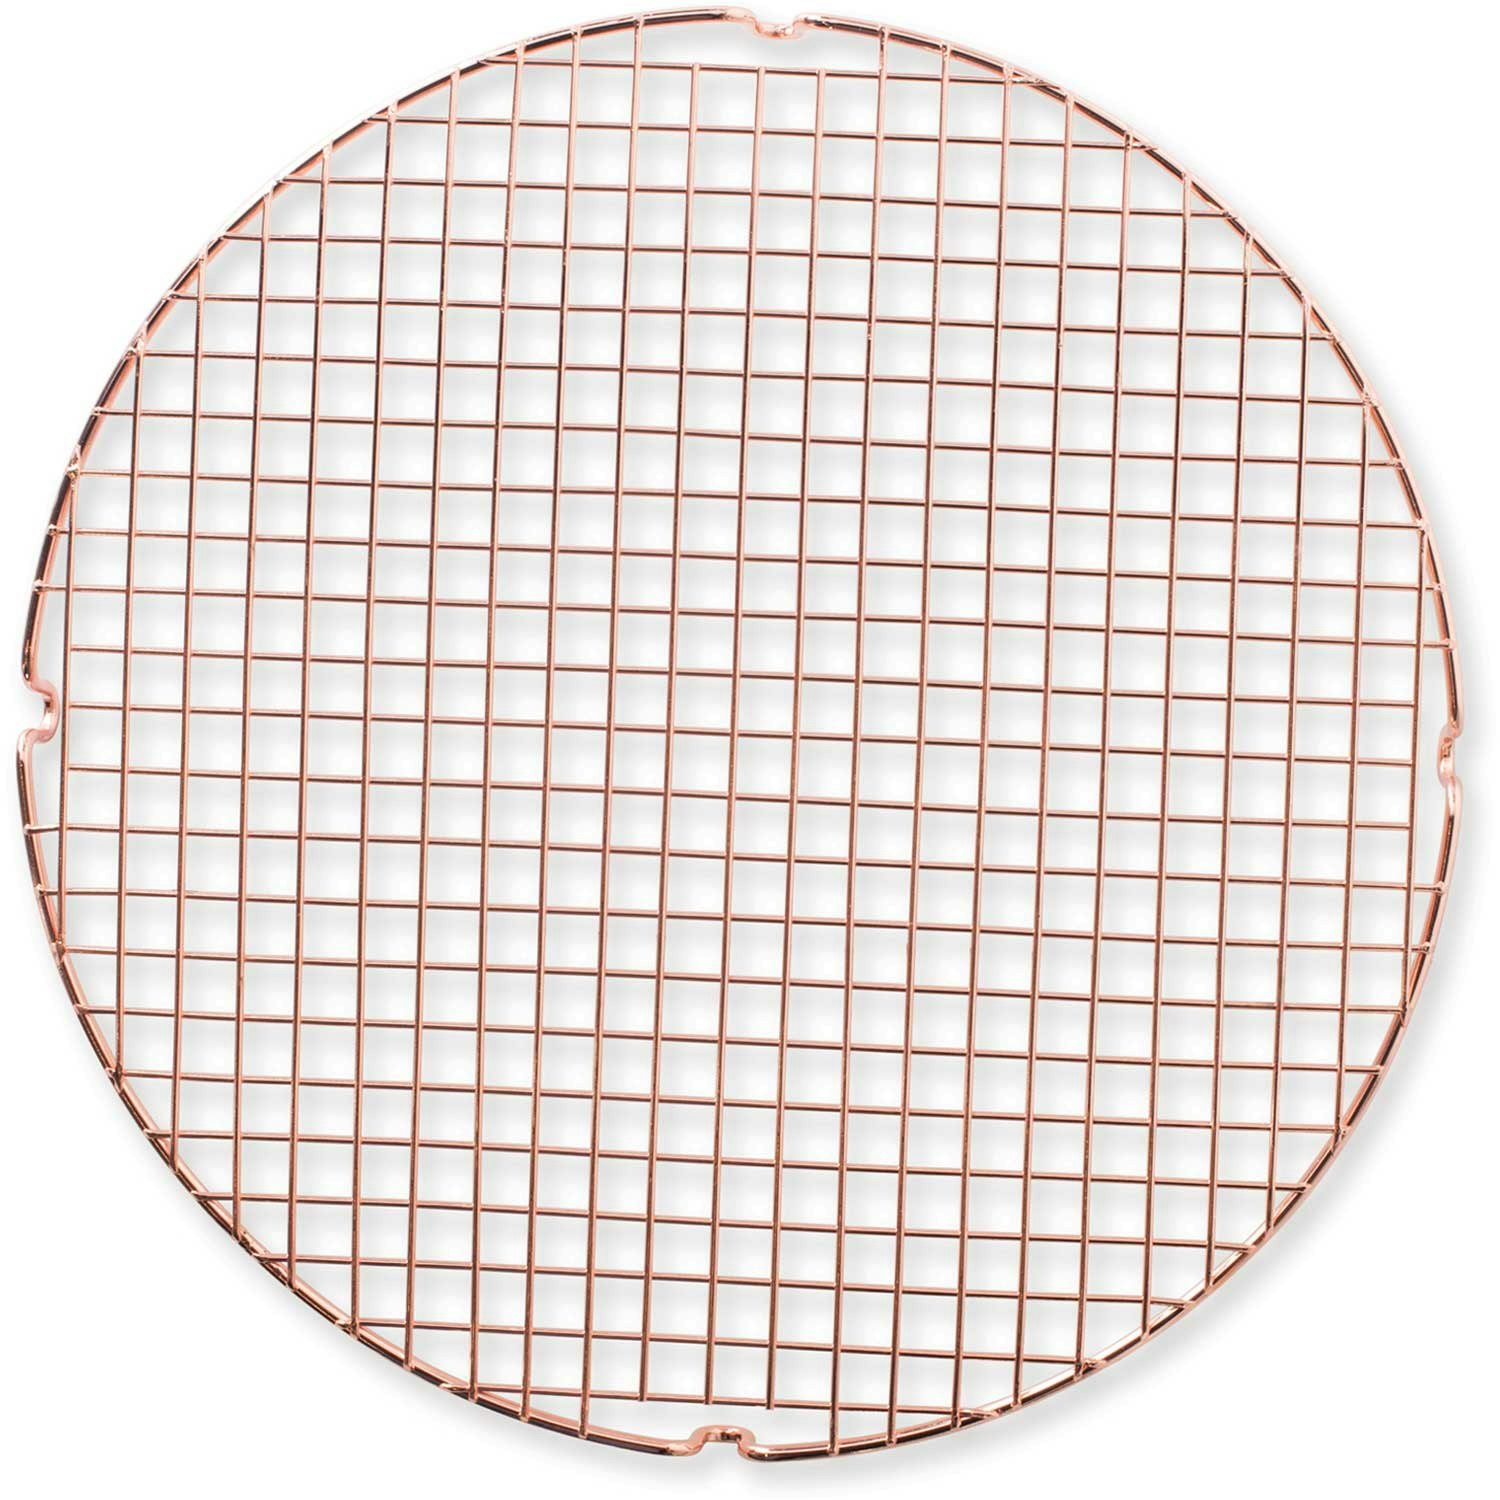 https://royaldesign.com/image/2/nordic-ware-around-swallowing-grids-in-copper-0